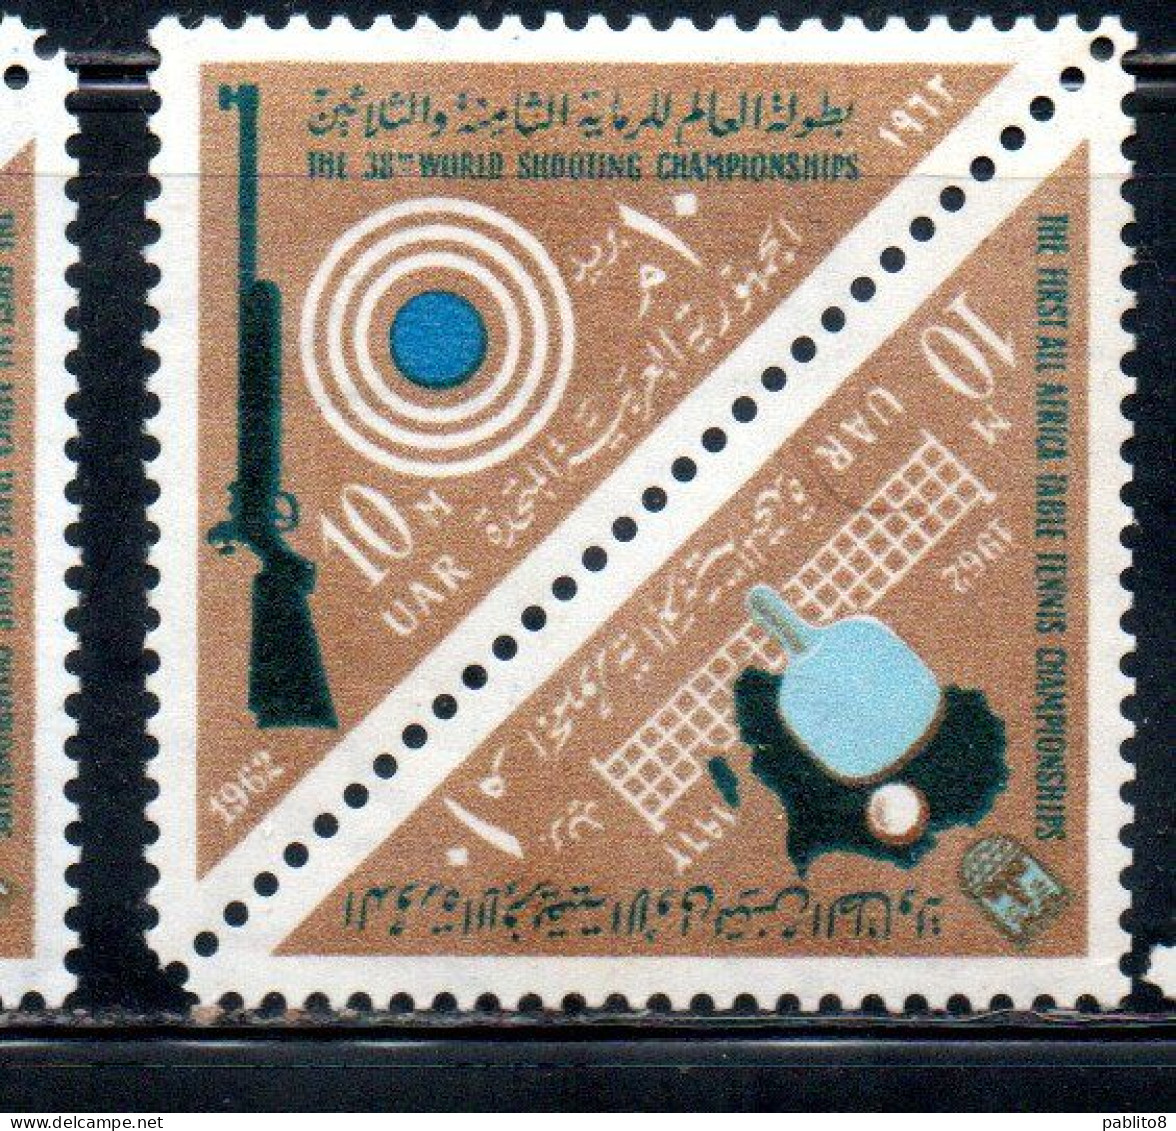 UAR EGYPT EGITTO 1962 WORLD SHOOTING CHAMPIONSHIPS AND AFRICAN TABLE TENNIS TOURNAMENT 10m MNH - Neufs